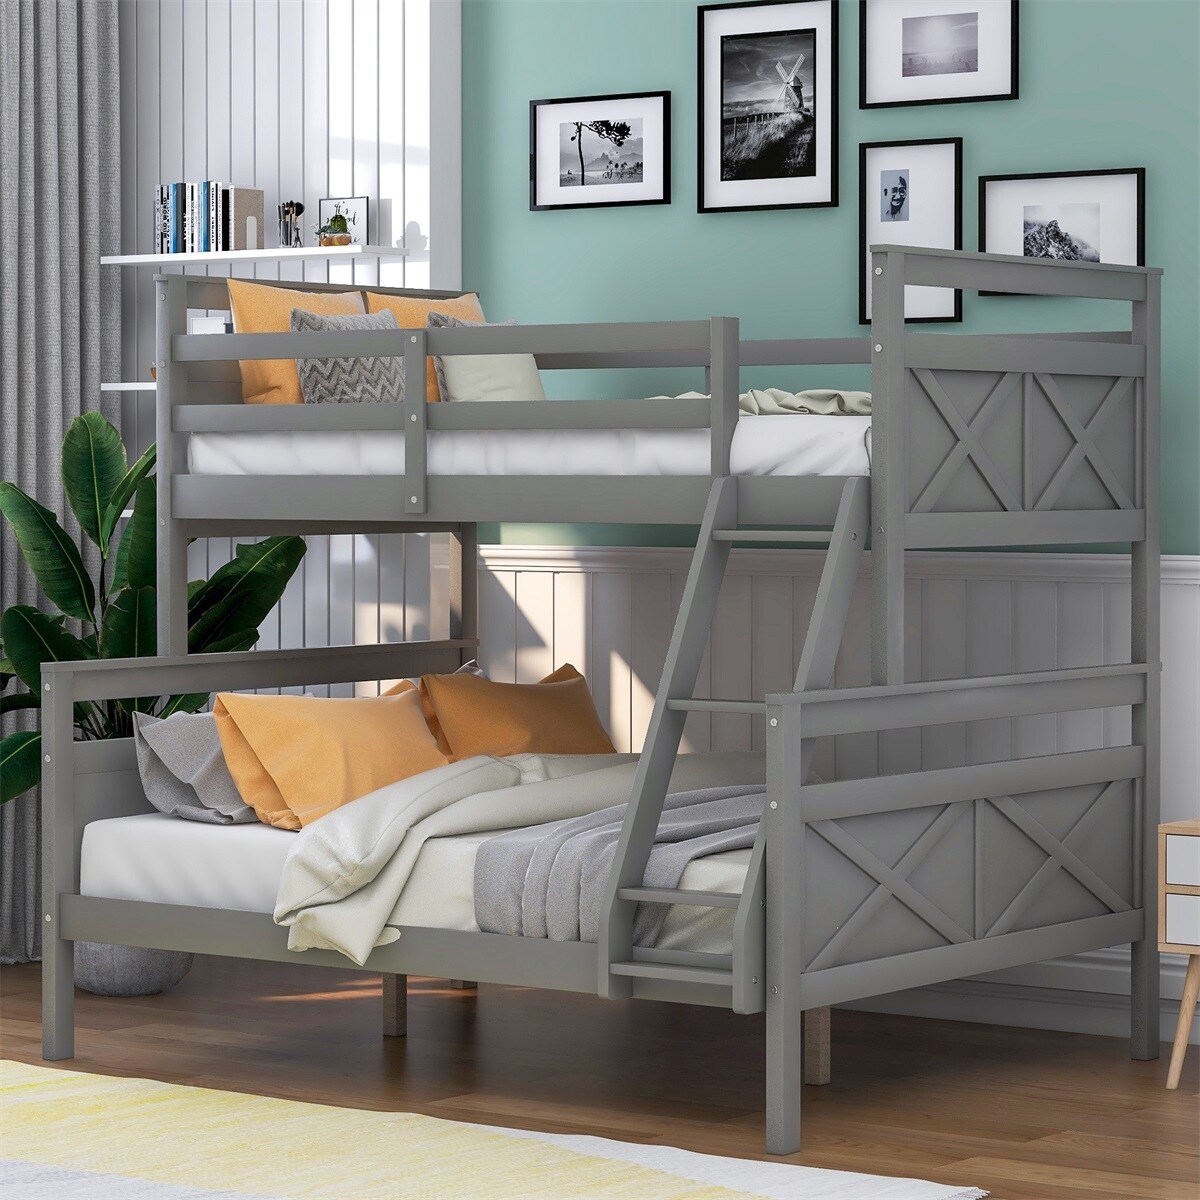 kids bed with ladder